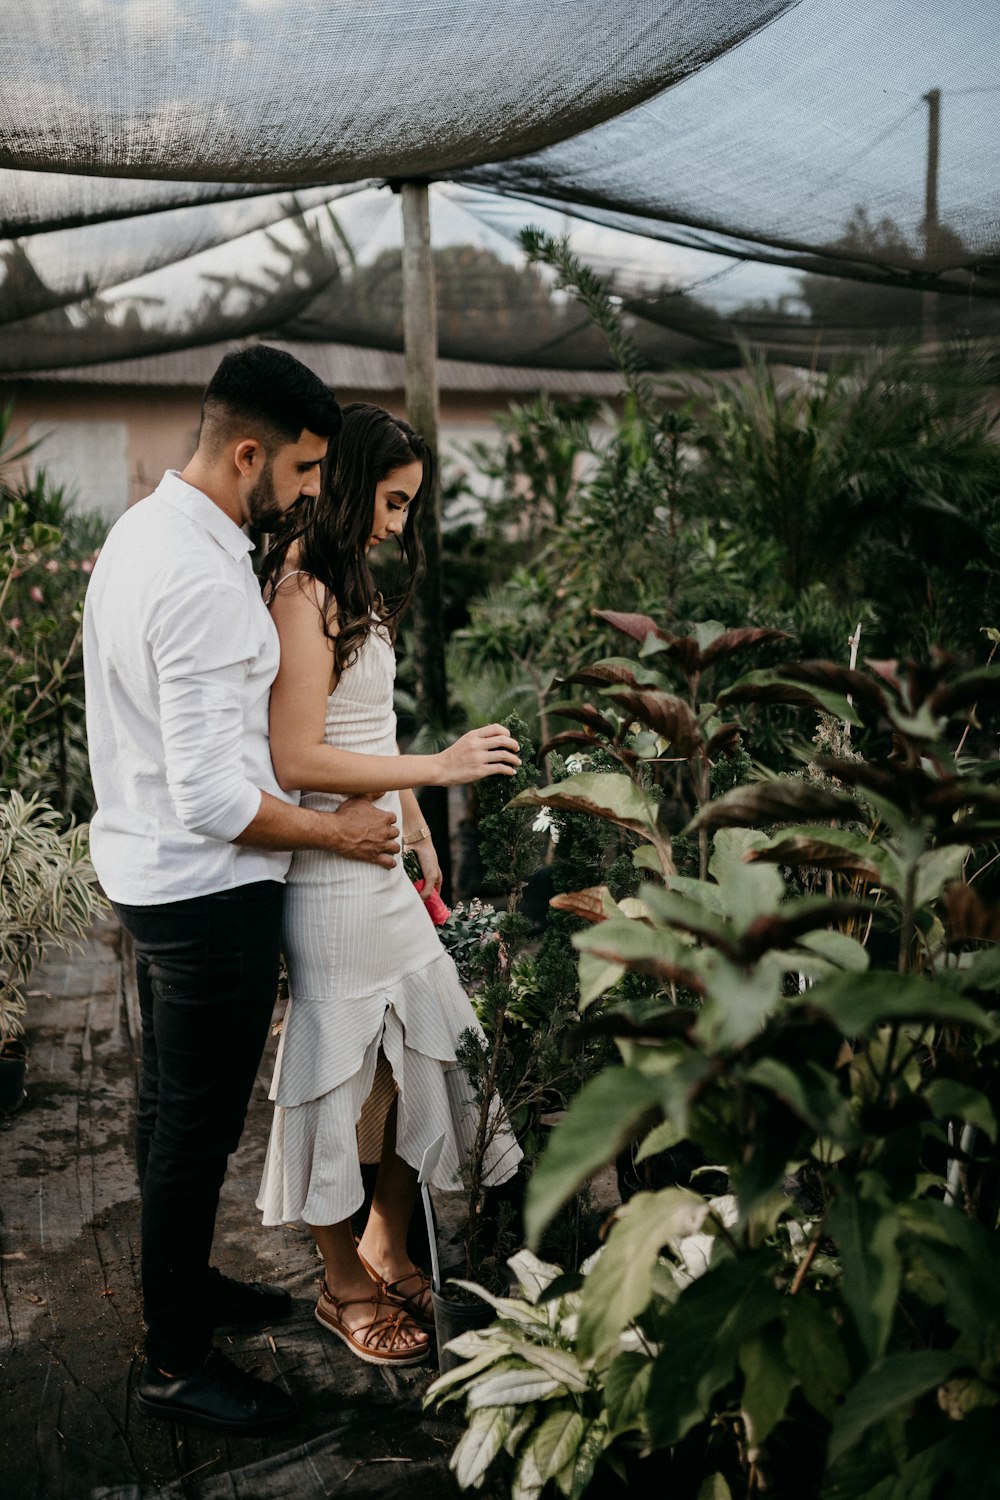 man in white t-shirt and woman in white t-shirt standing near green plants during